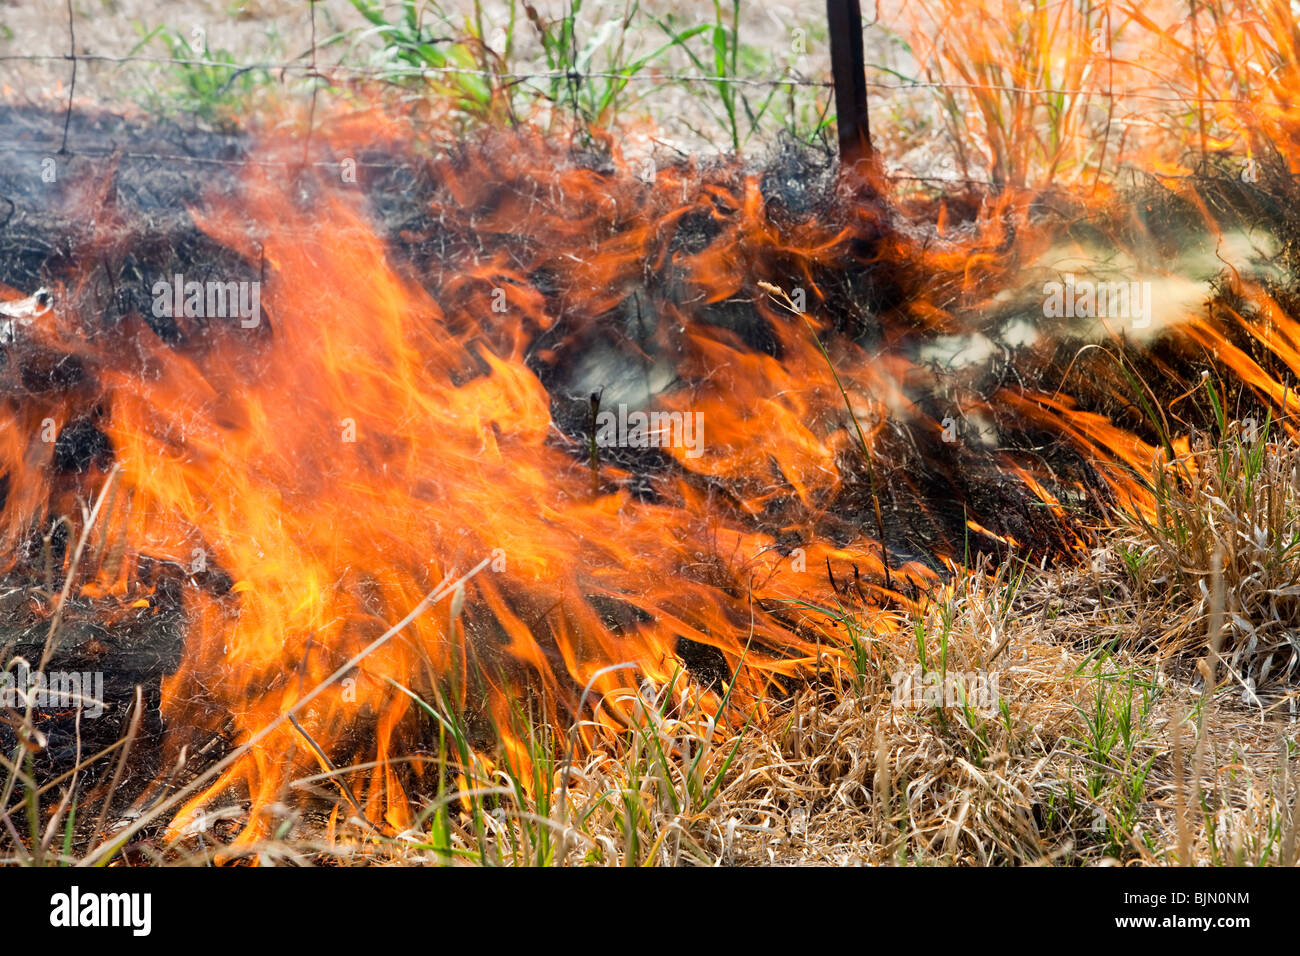 A roadside fire near Shepperton, Victoria, Australia. Bush fires are becoming more frequent due to the ongoing drought. Stock Photo